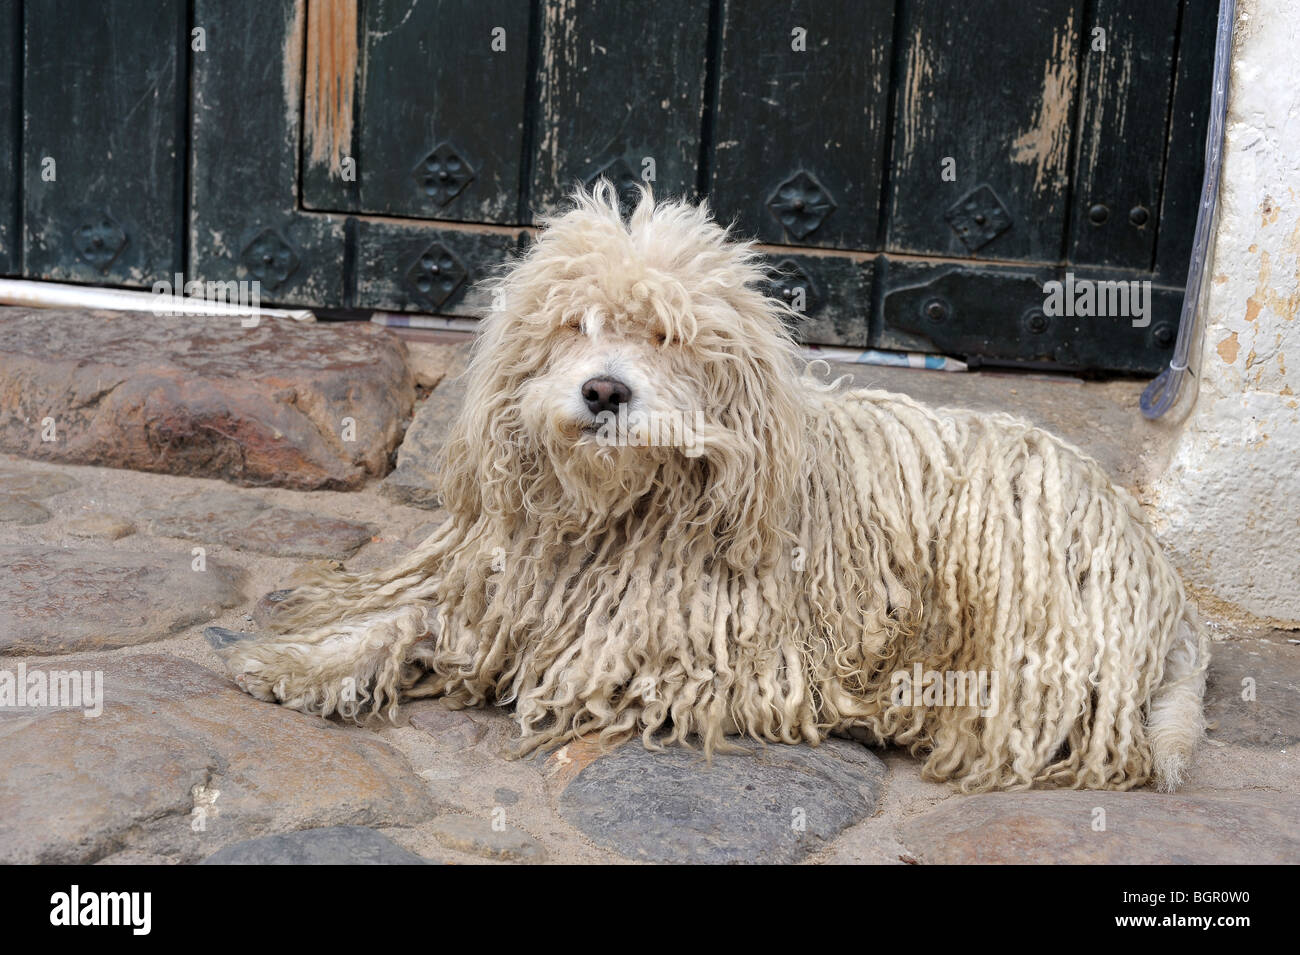 Shaggy white dog. Colombia, South America Stock Photo - Alamy